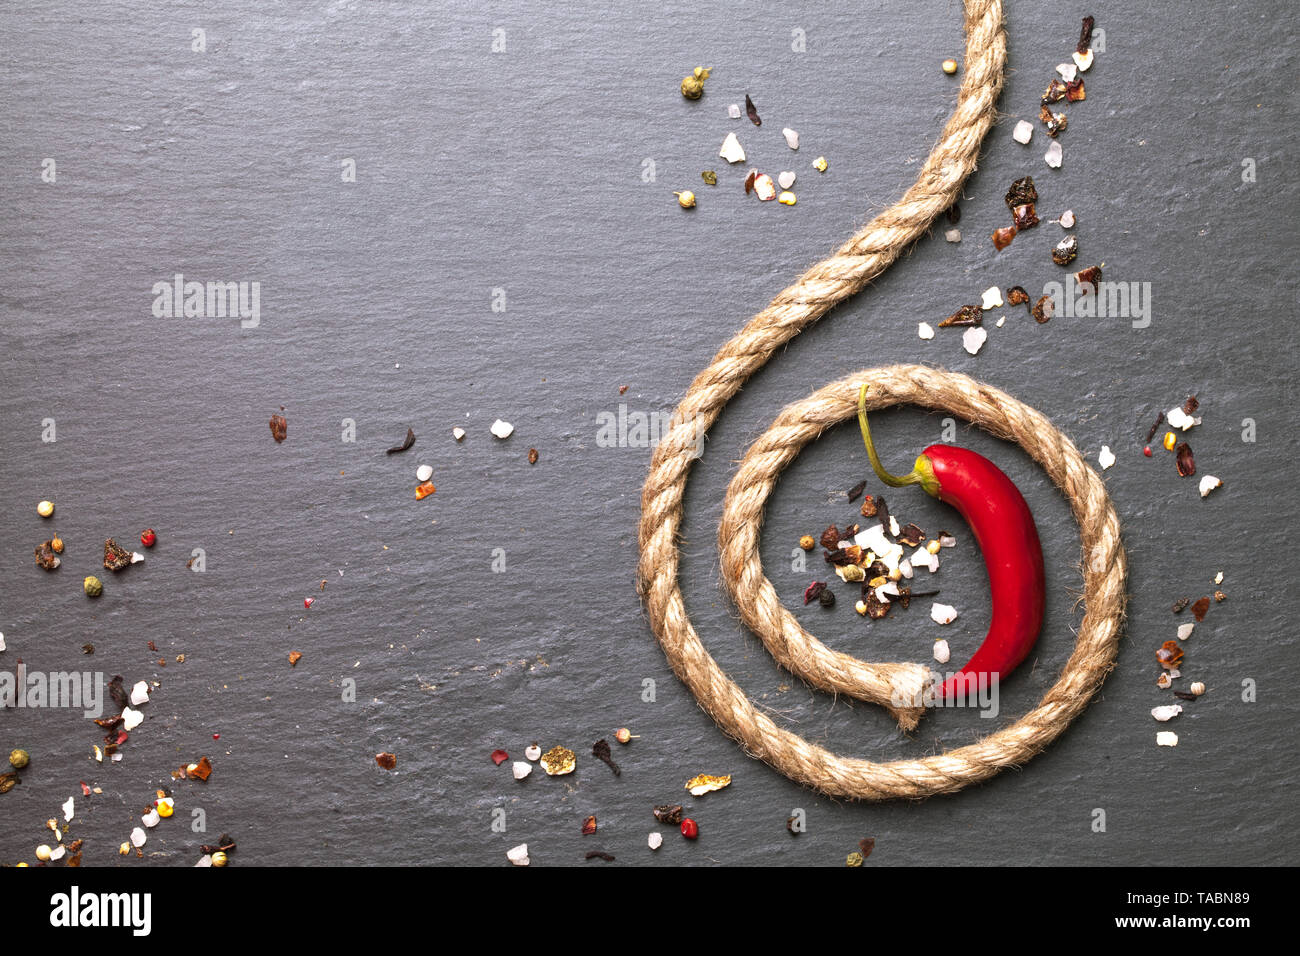 red chili pepper with a rope Stock Photo